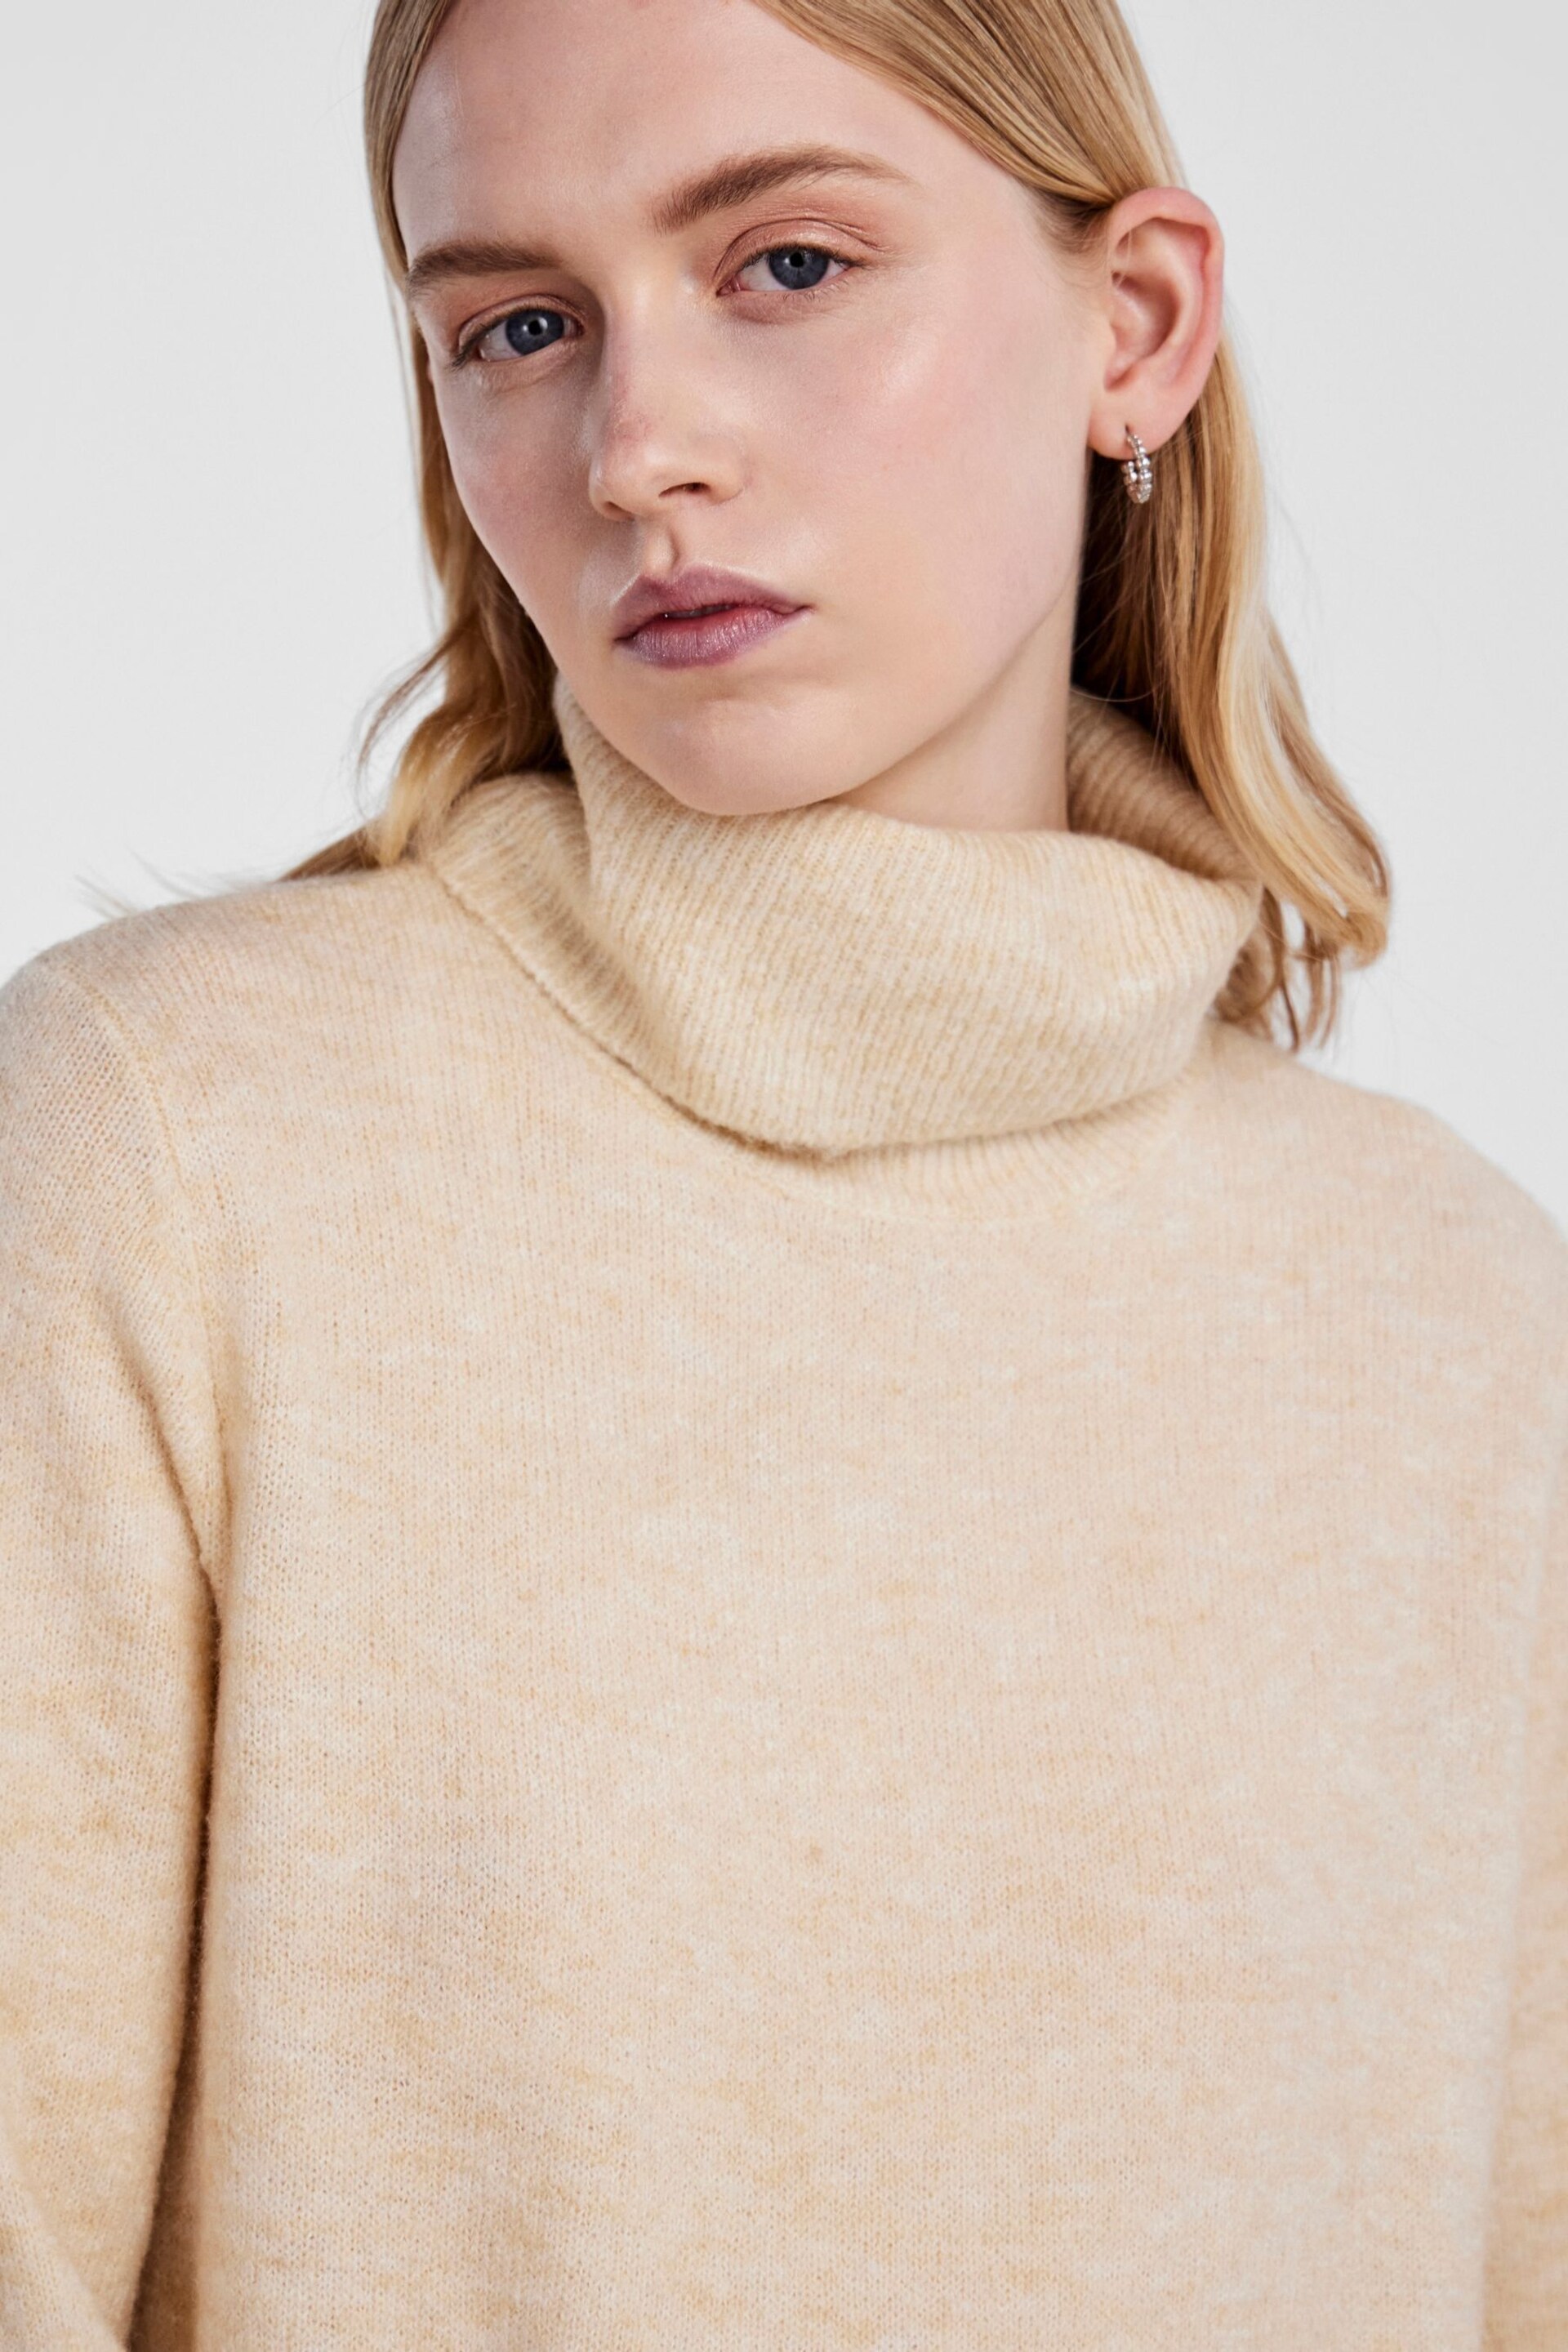 PIECES Cream Roll Neck Knitted Midi Jumper Dress - Image 4 of 5